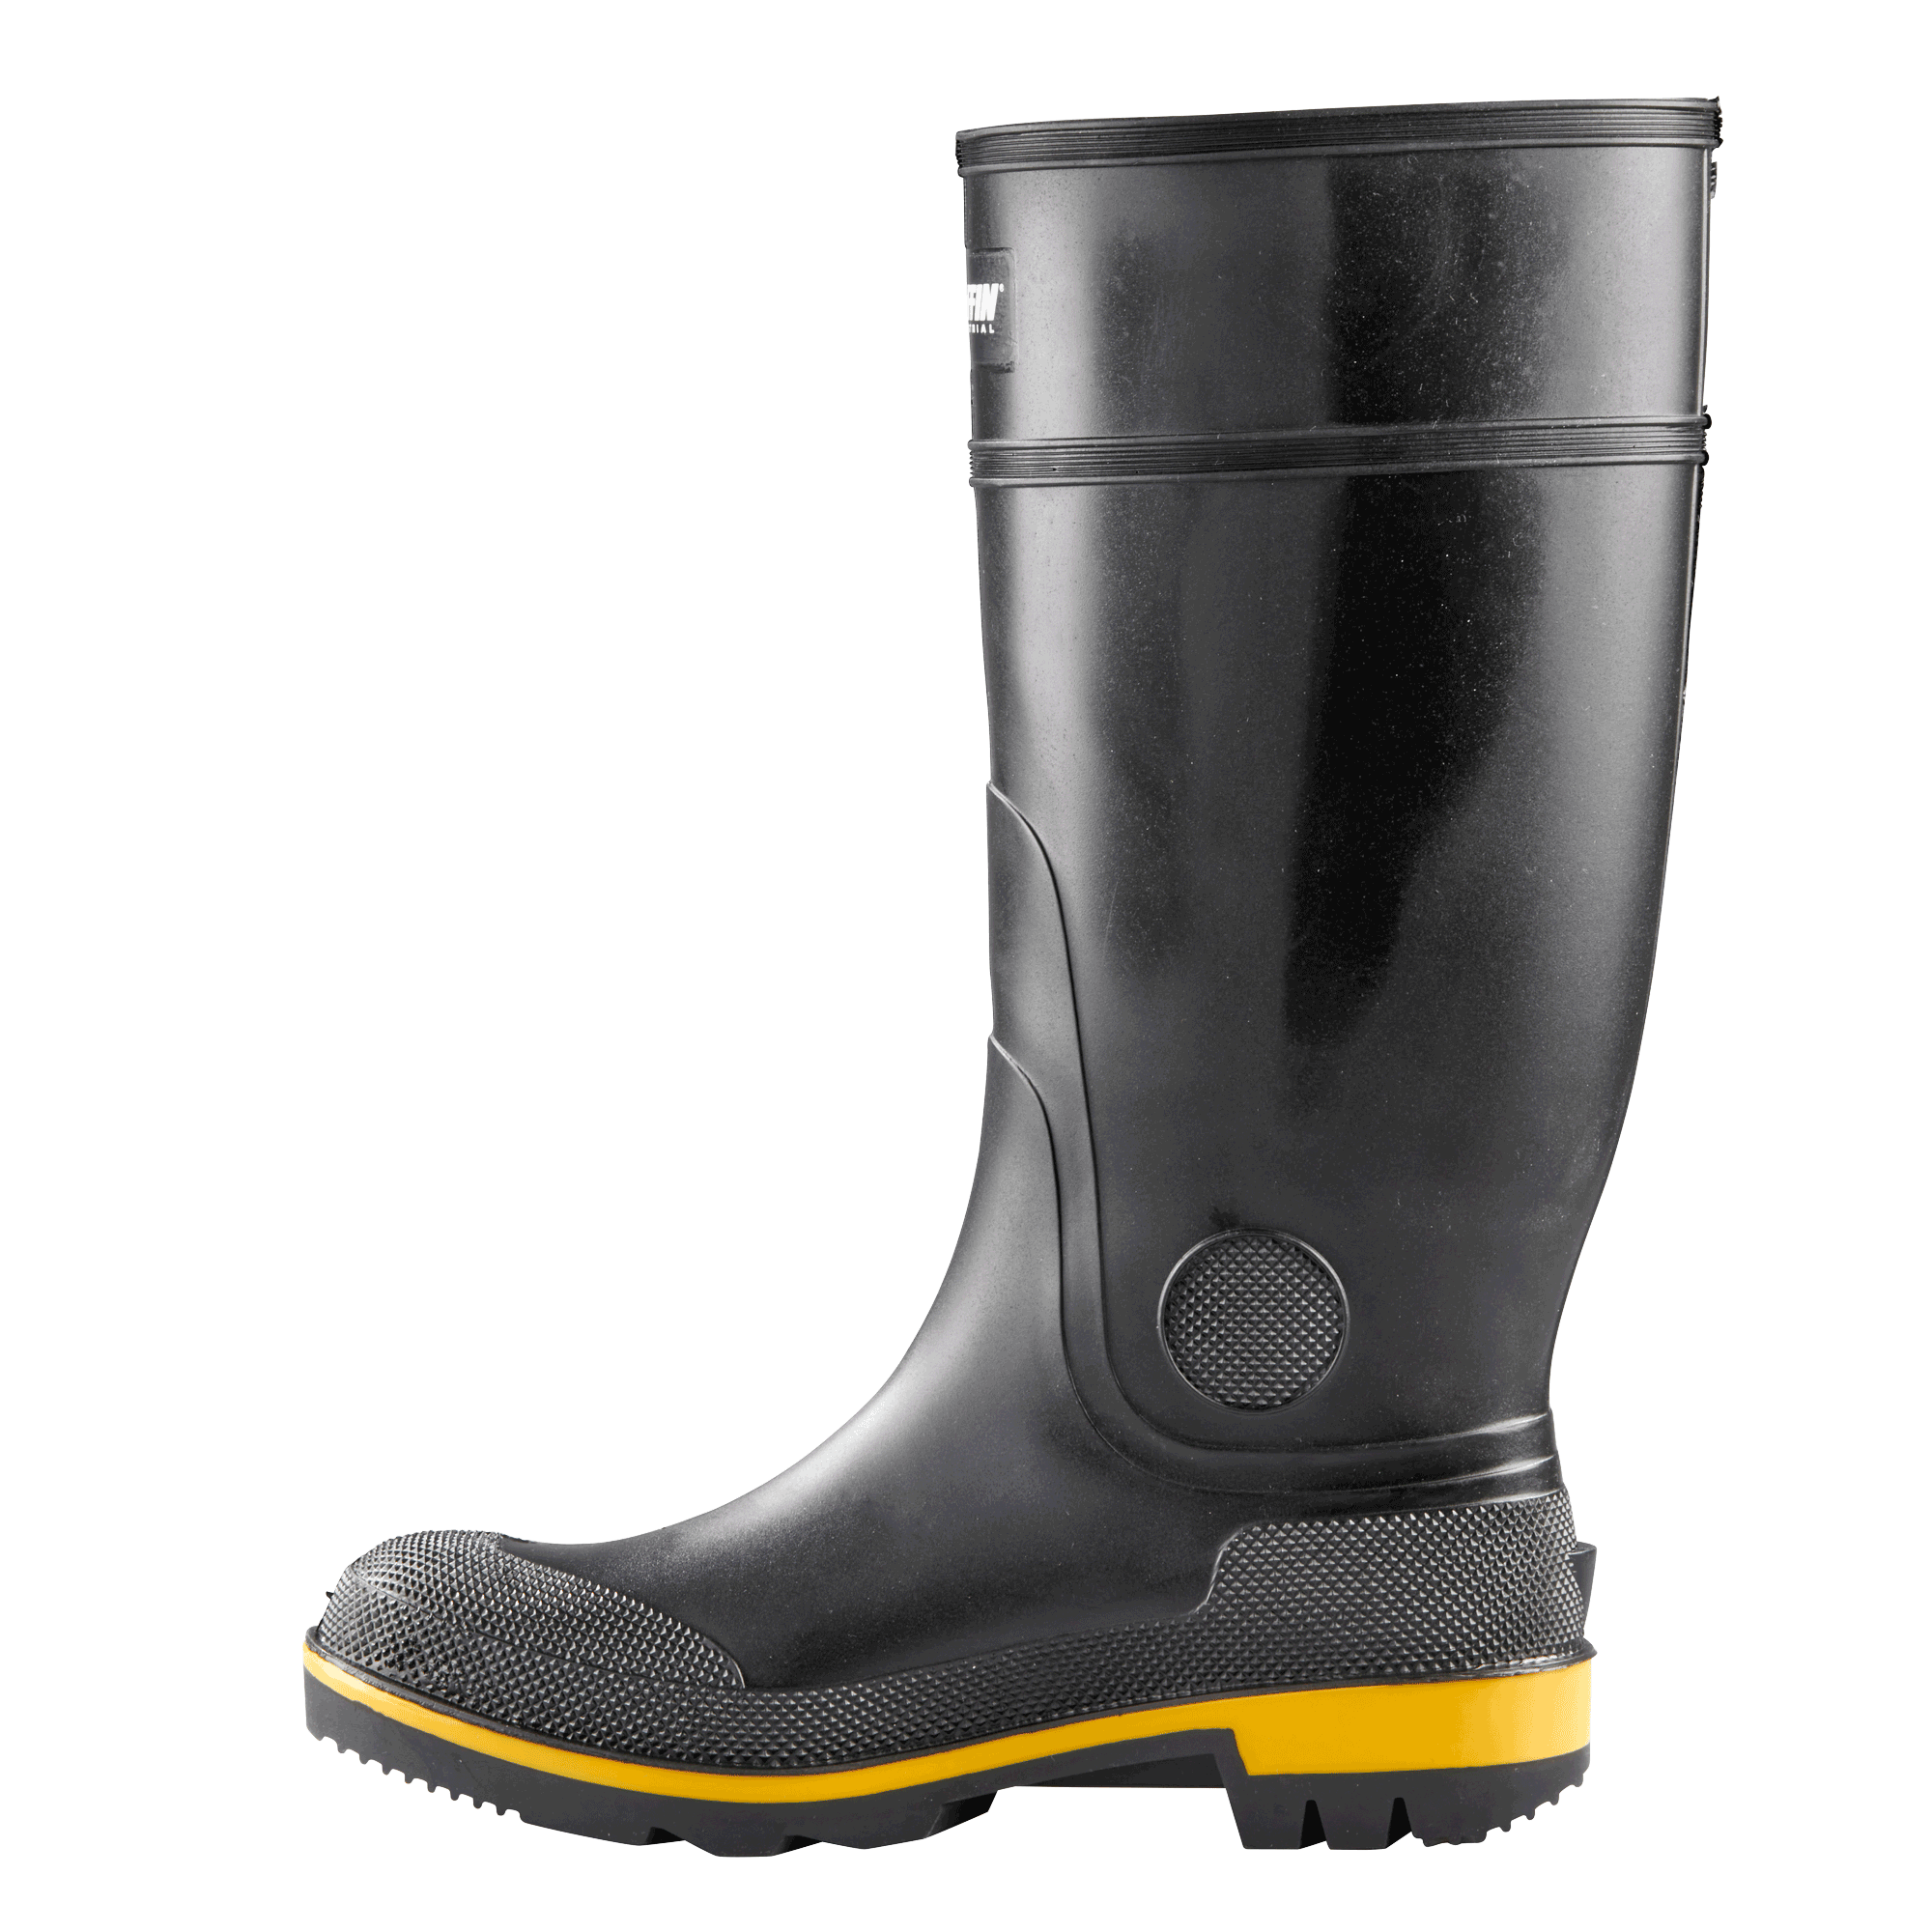 MAXIMUM (Safety Toe & Plate) | Men's Boot – Baffin - Born in the 